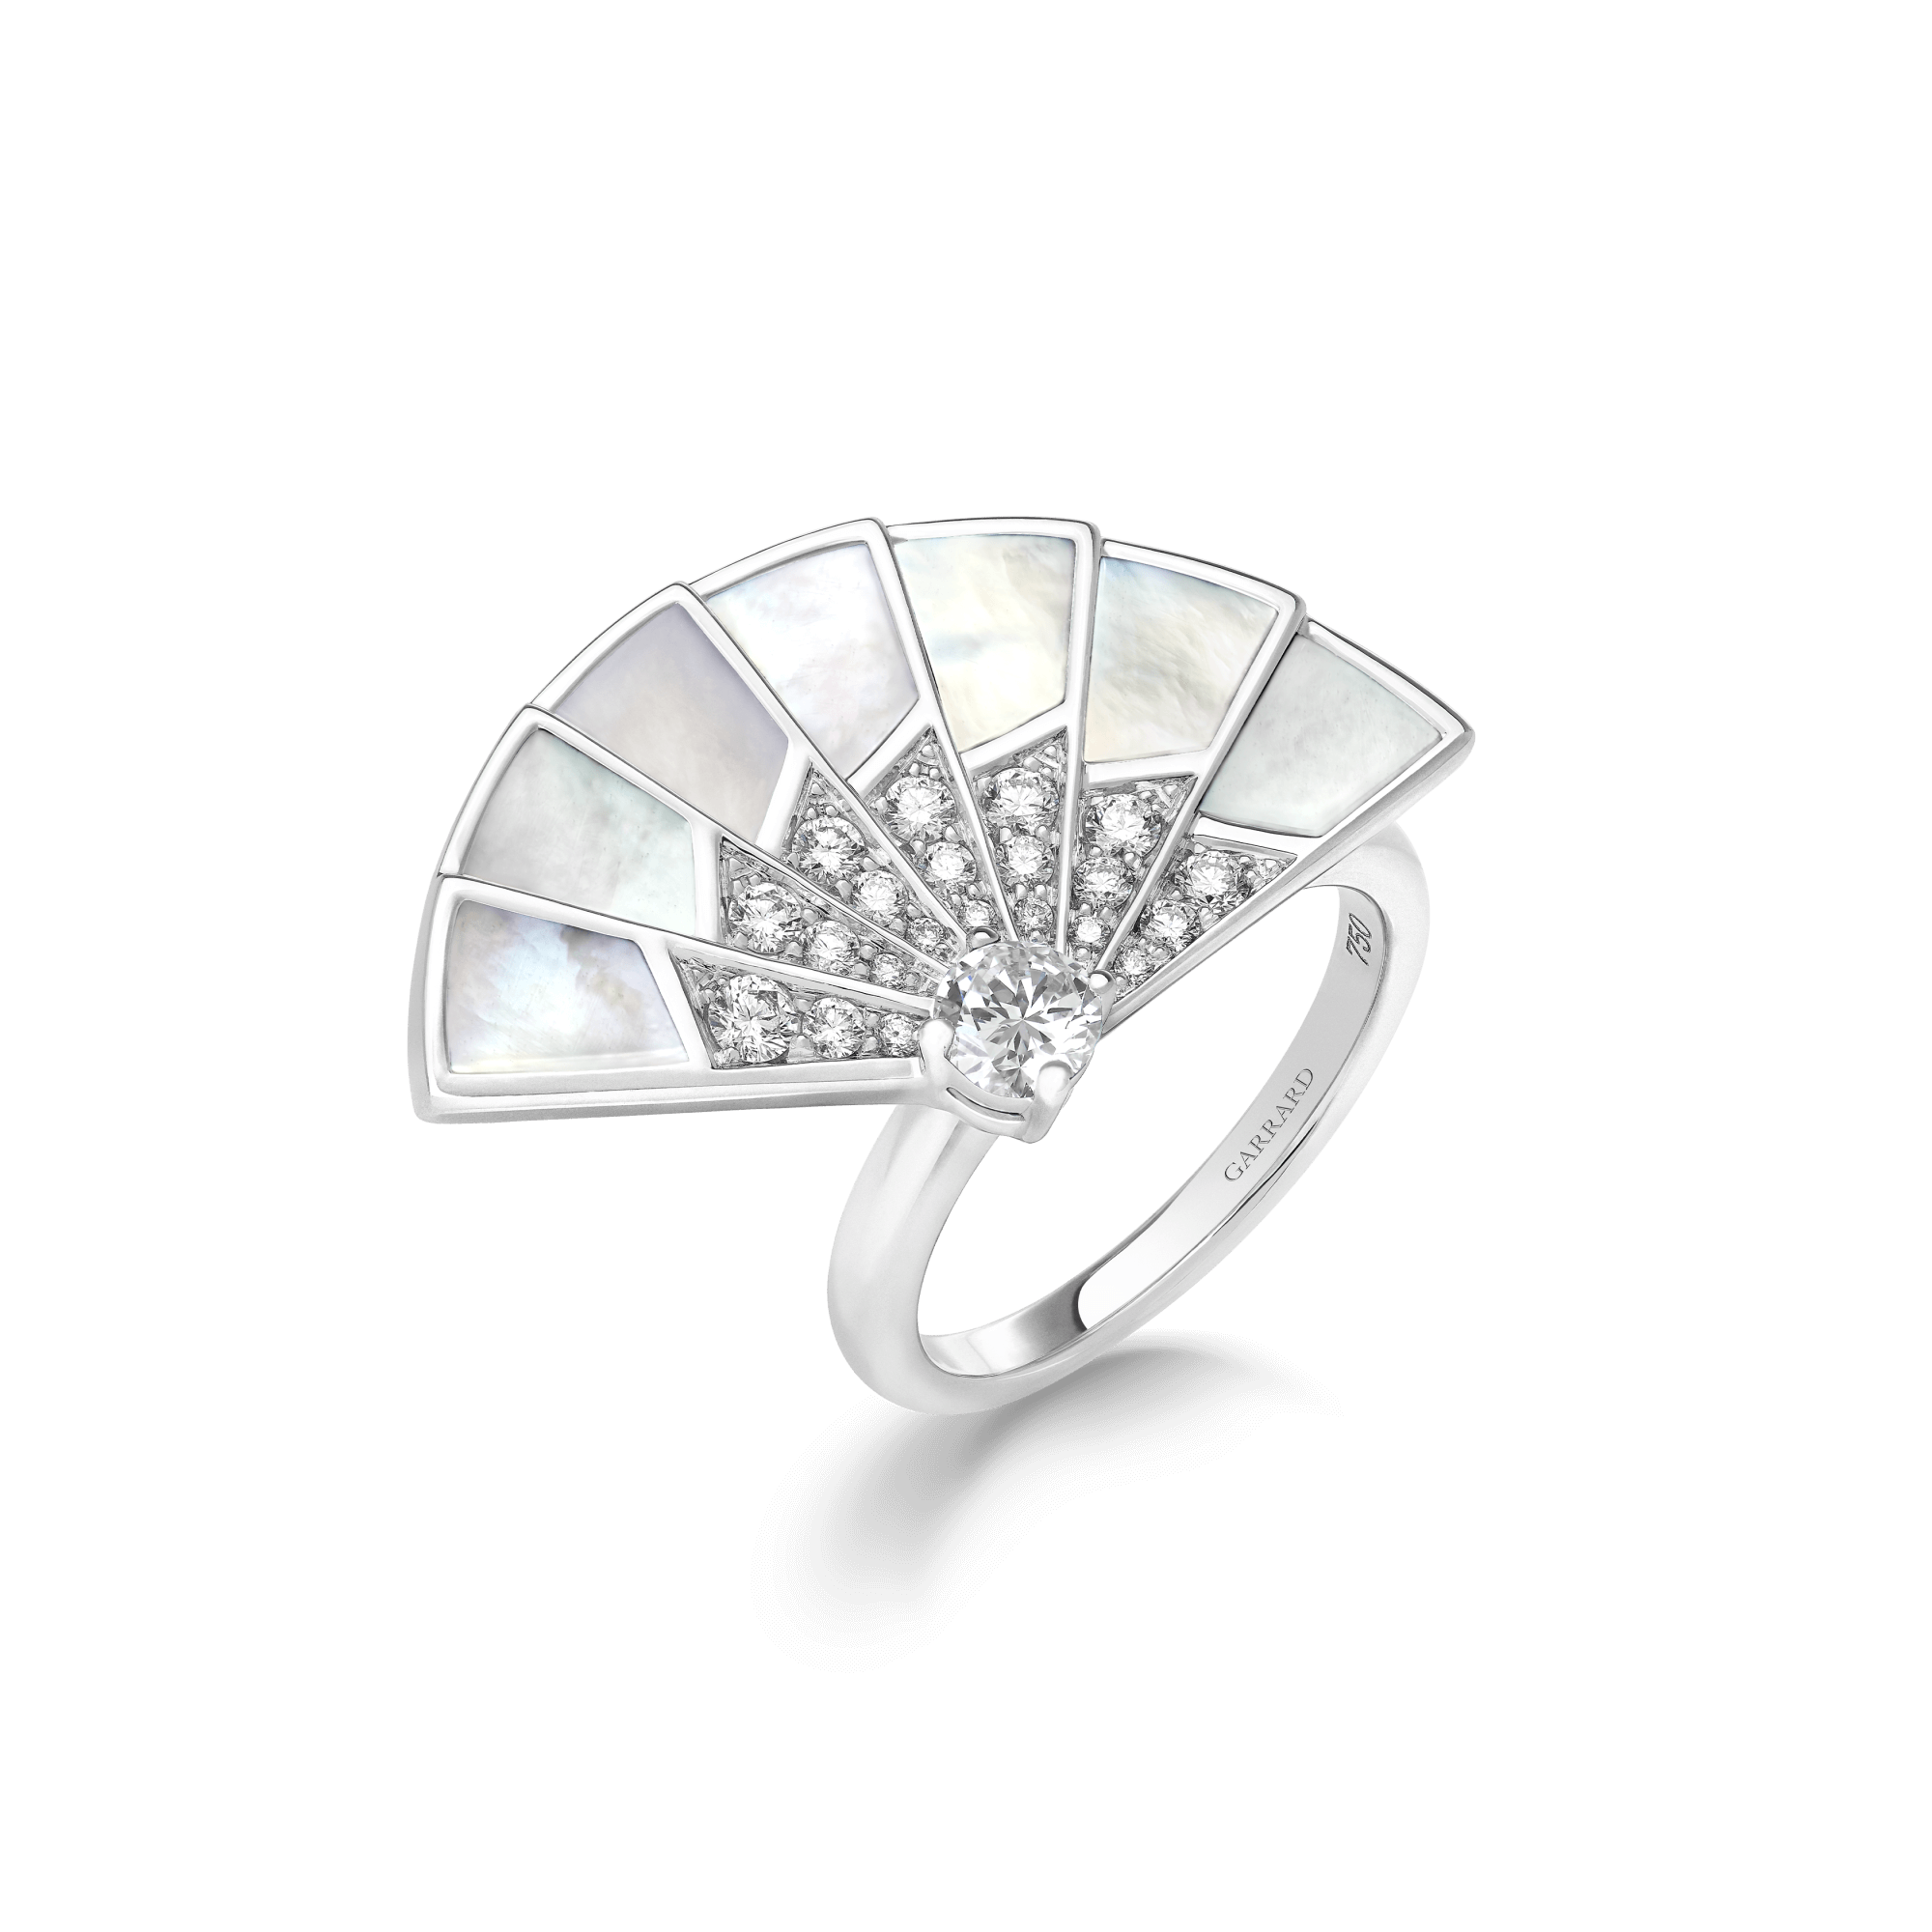 Garrard Fanfare Symphony jewellery collection Diamond and Mother of Pearl Ring In 18ct White Gold 2018285 Hero View